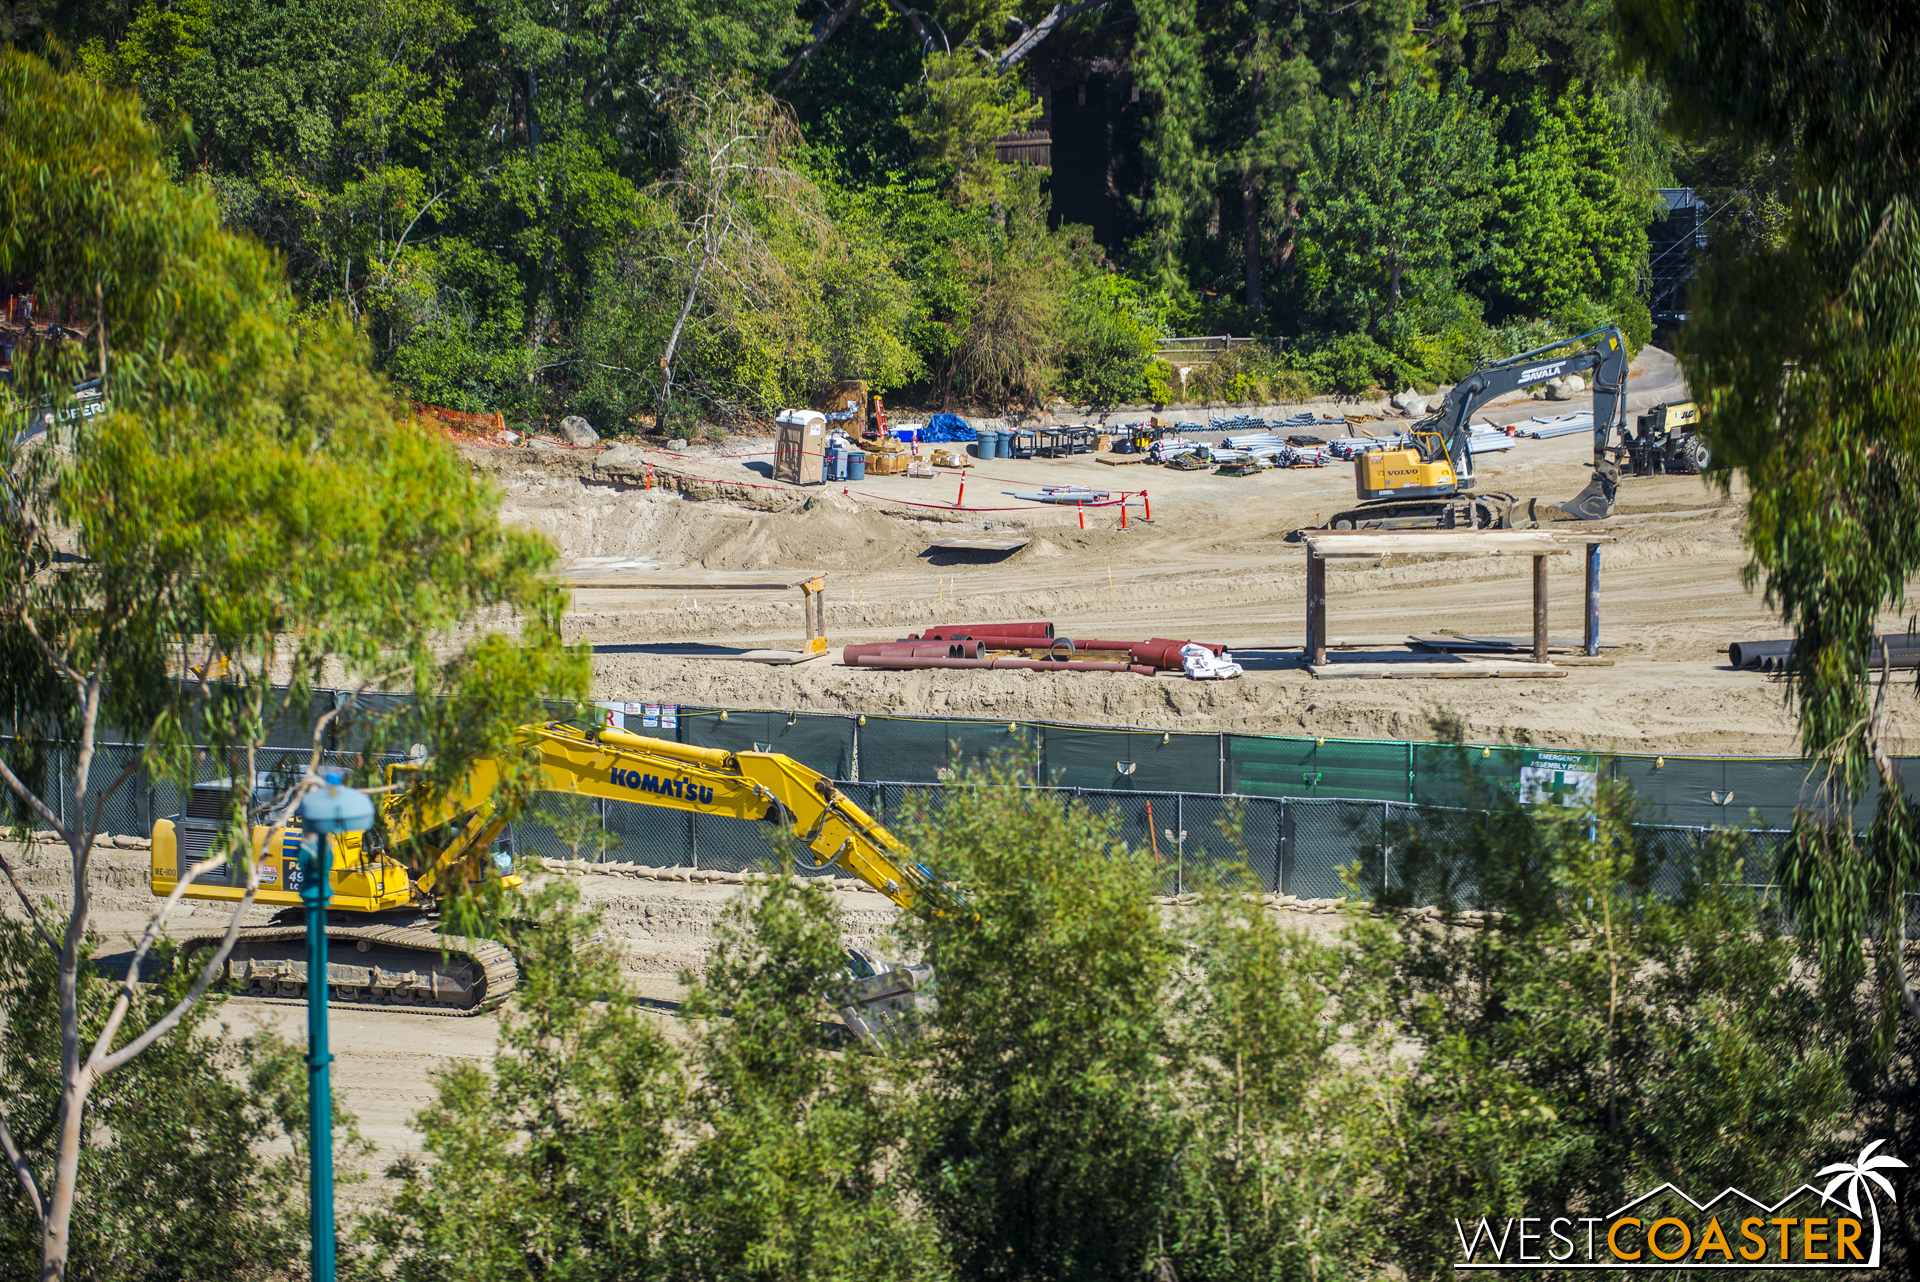  Returning back to the Mickey and Friends Parking Structure, we glimpse a few more areas more southwest along the site through the trees. 